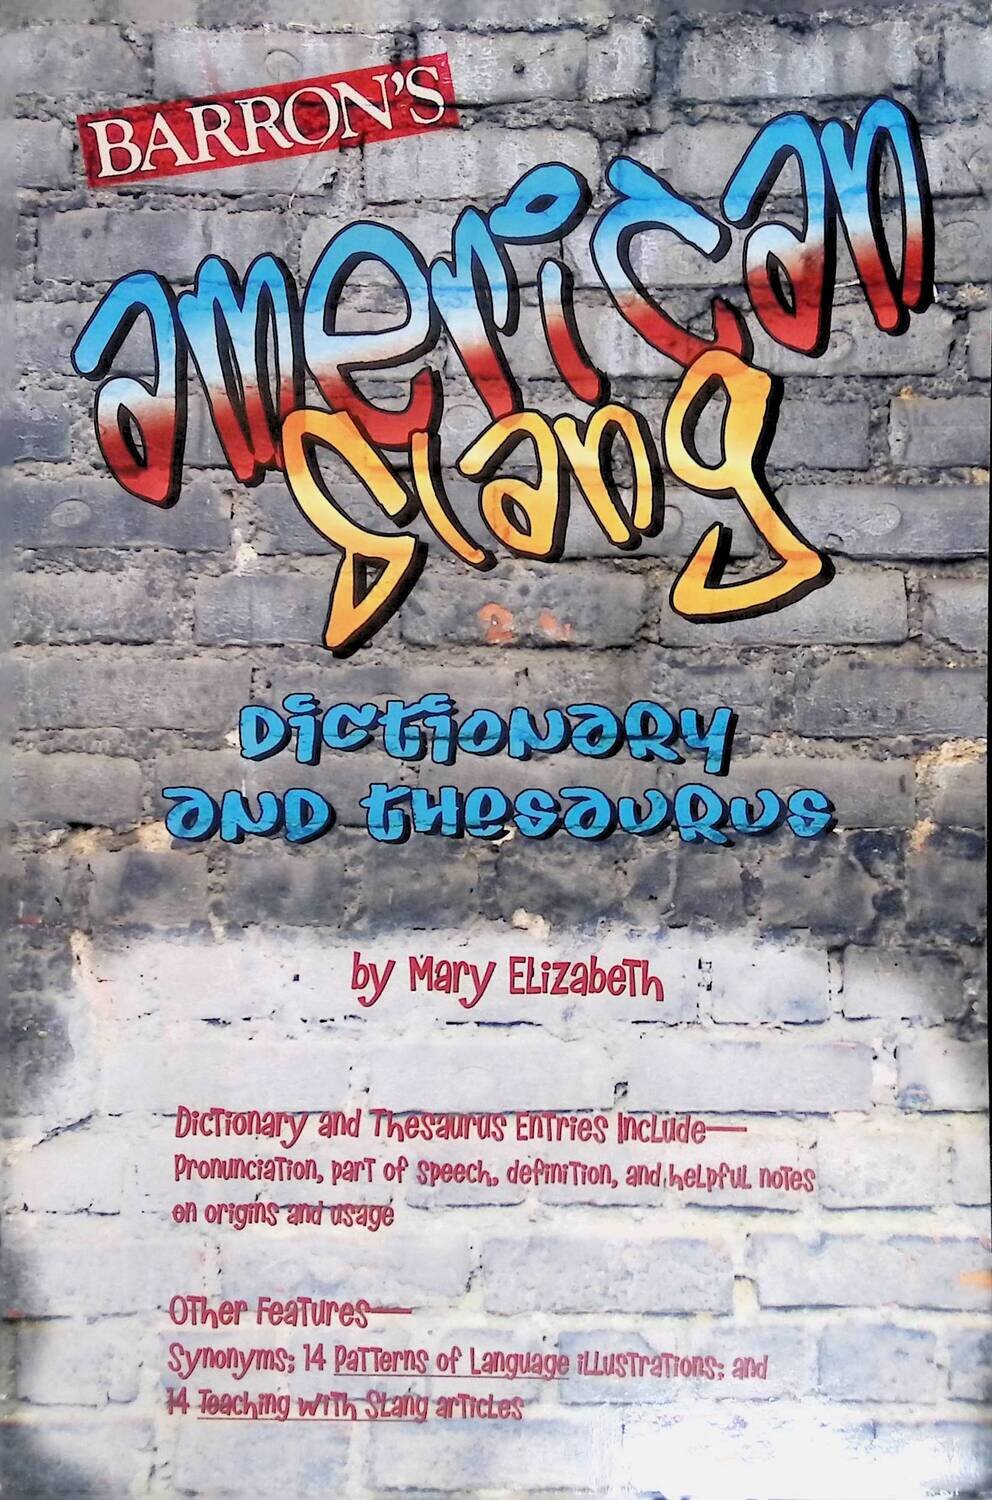 American Slang Dictionary and Thesaurus; Mary Elizabeth